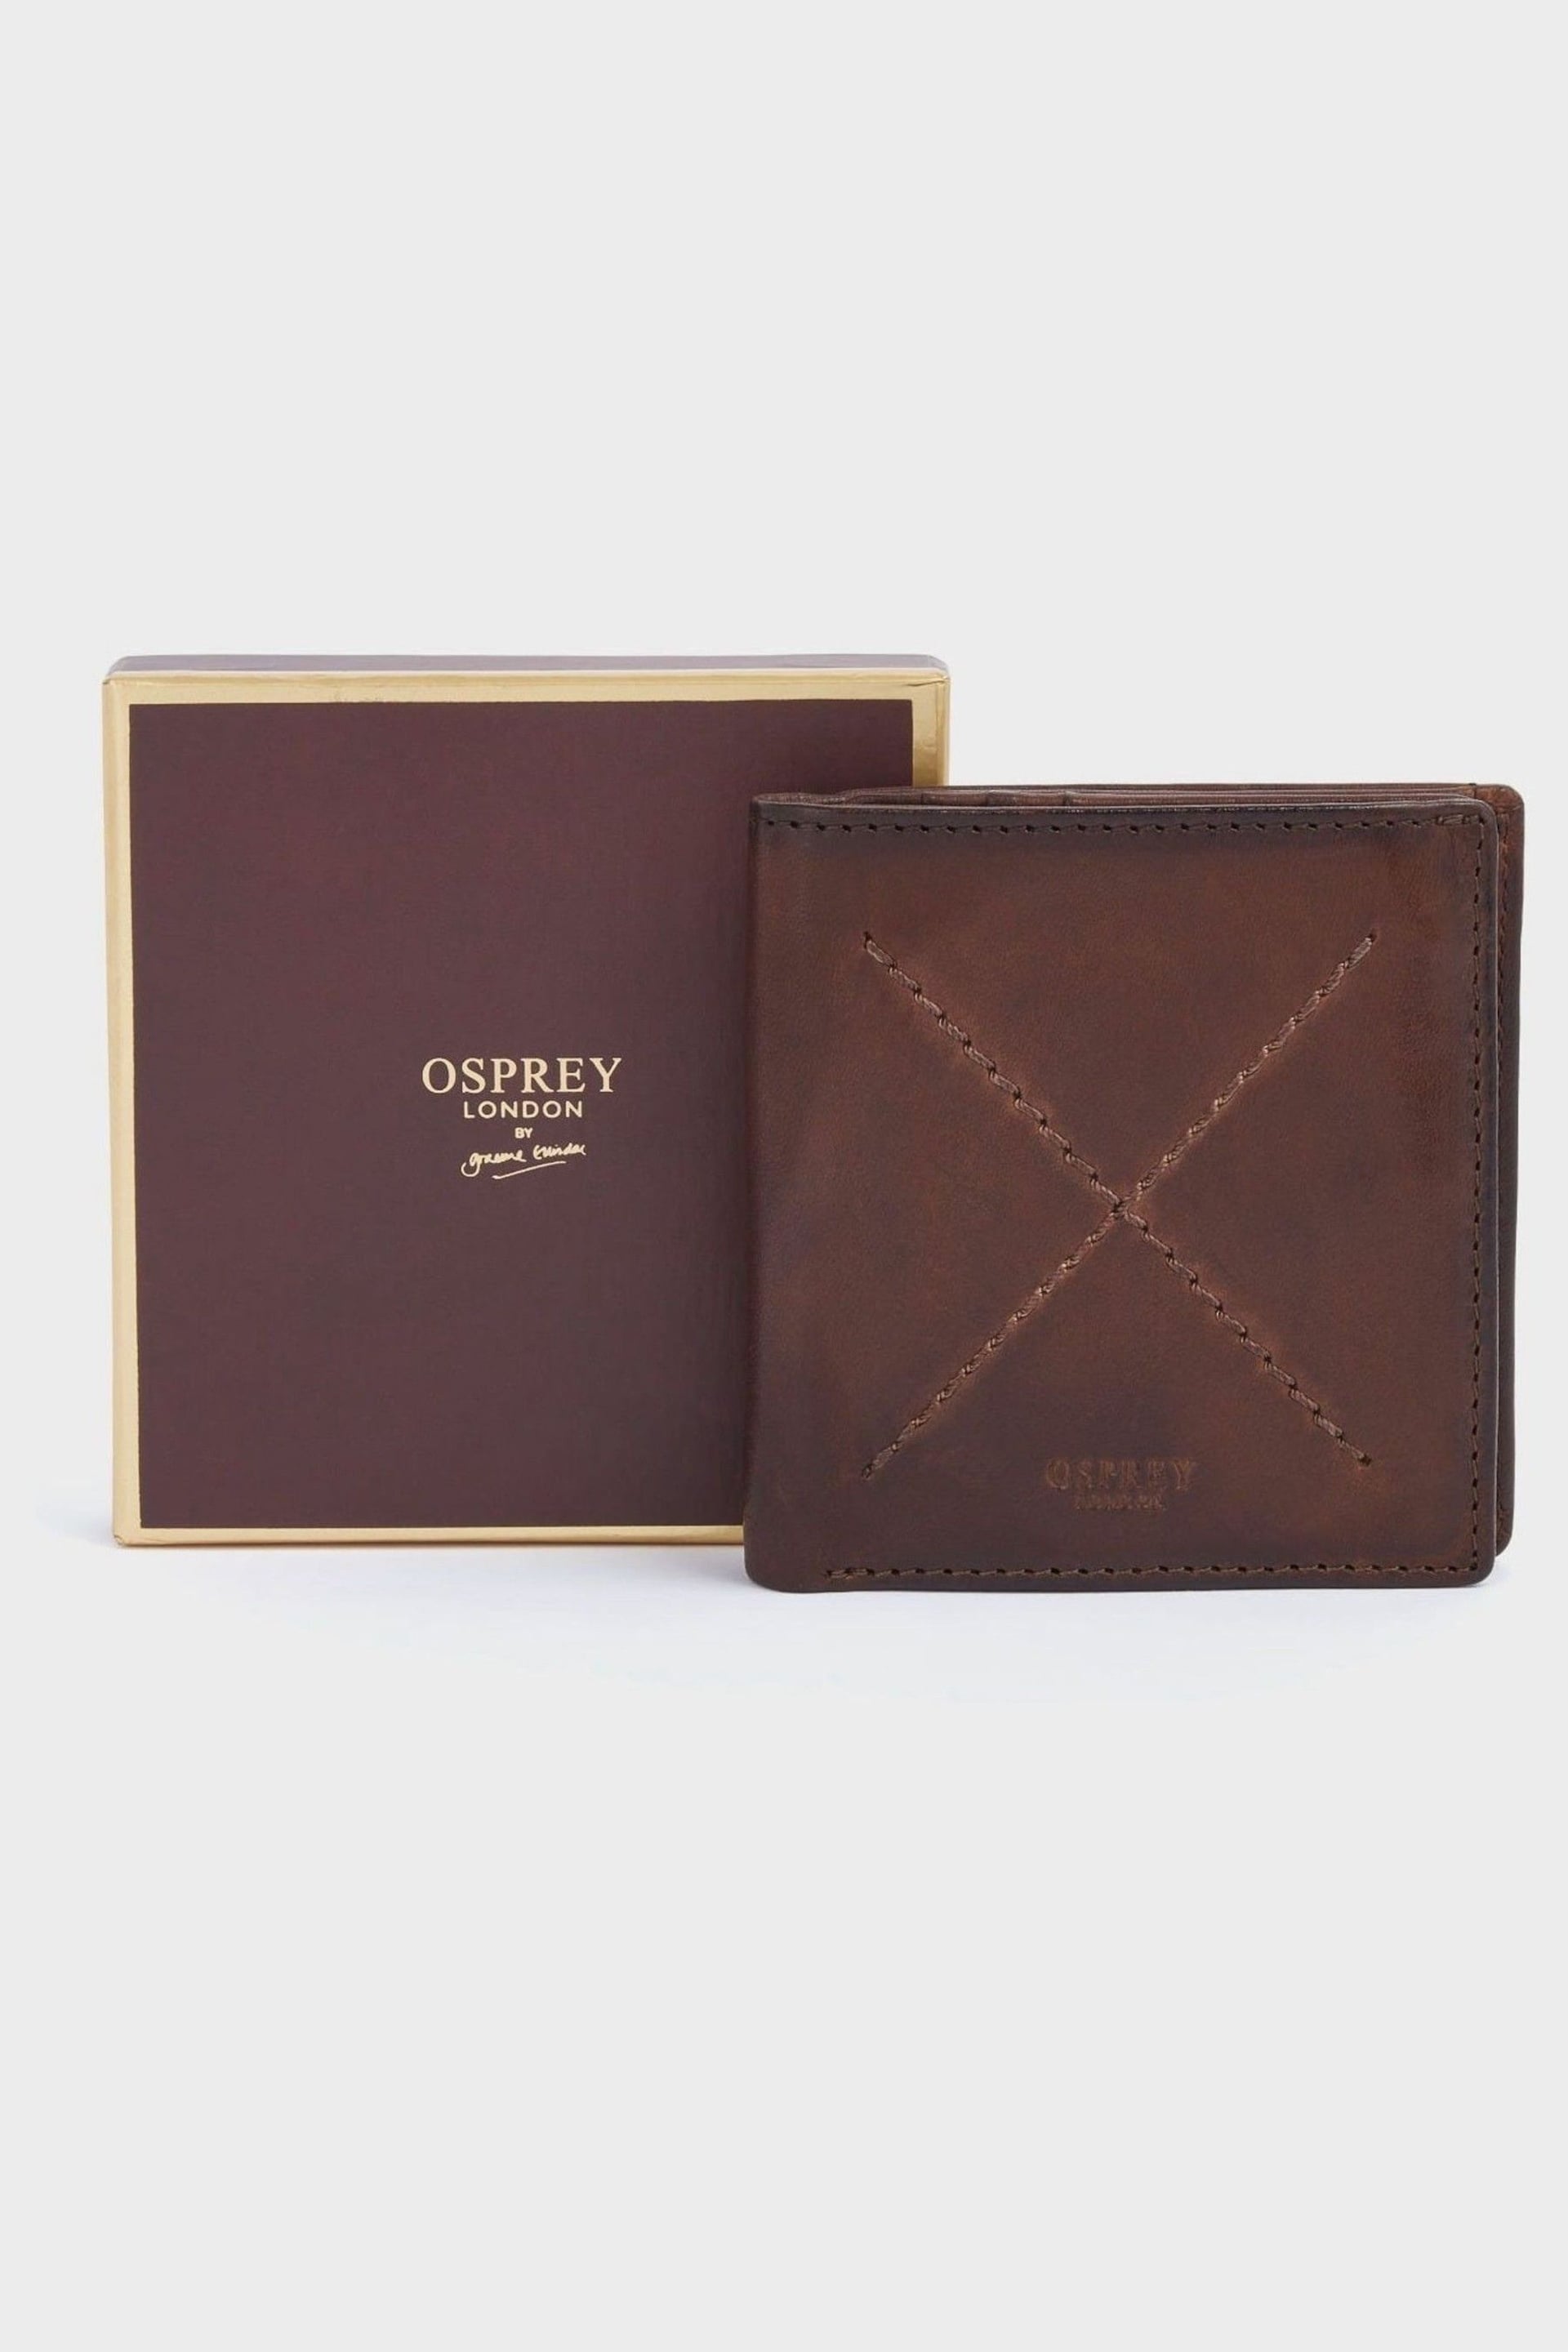 OSPREY LONDON The X Stitch Leather RFID ID Cardholder Brown Wallet - Image 1 of 6